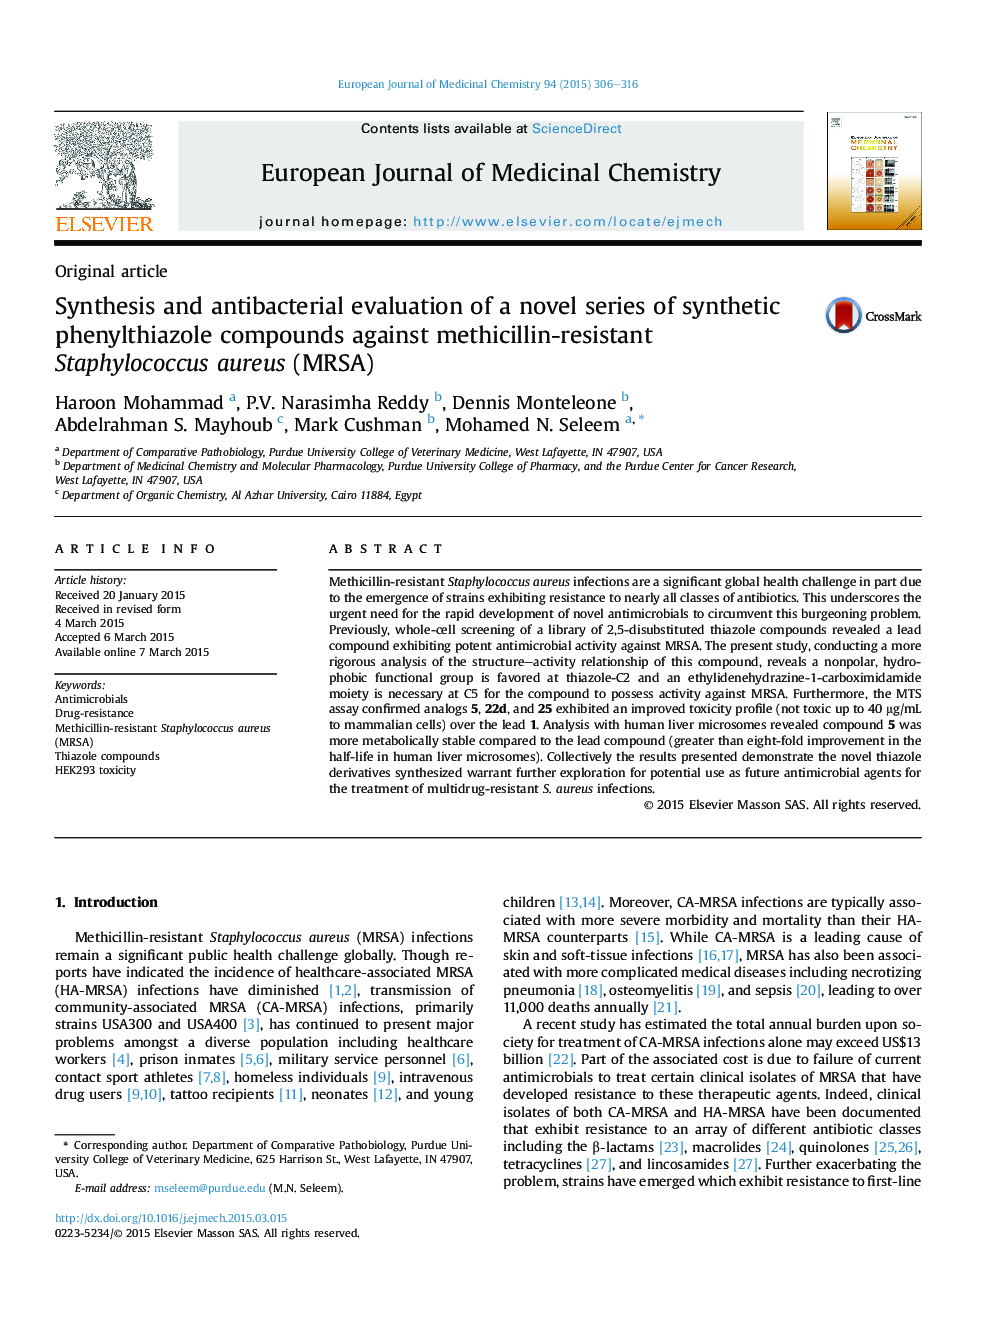 Synthesis and antibacterial evaluation of a novel series of synthetic phenylthiazole compounds against methicillin-resistant Staphylococcus aureus (MRSA)